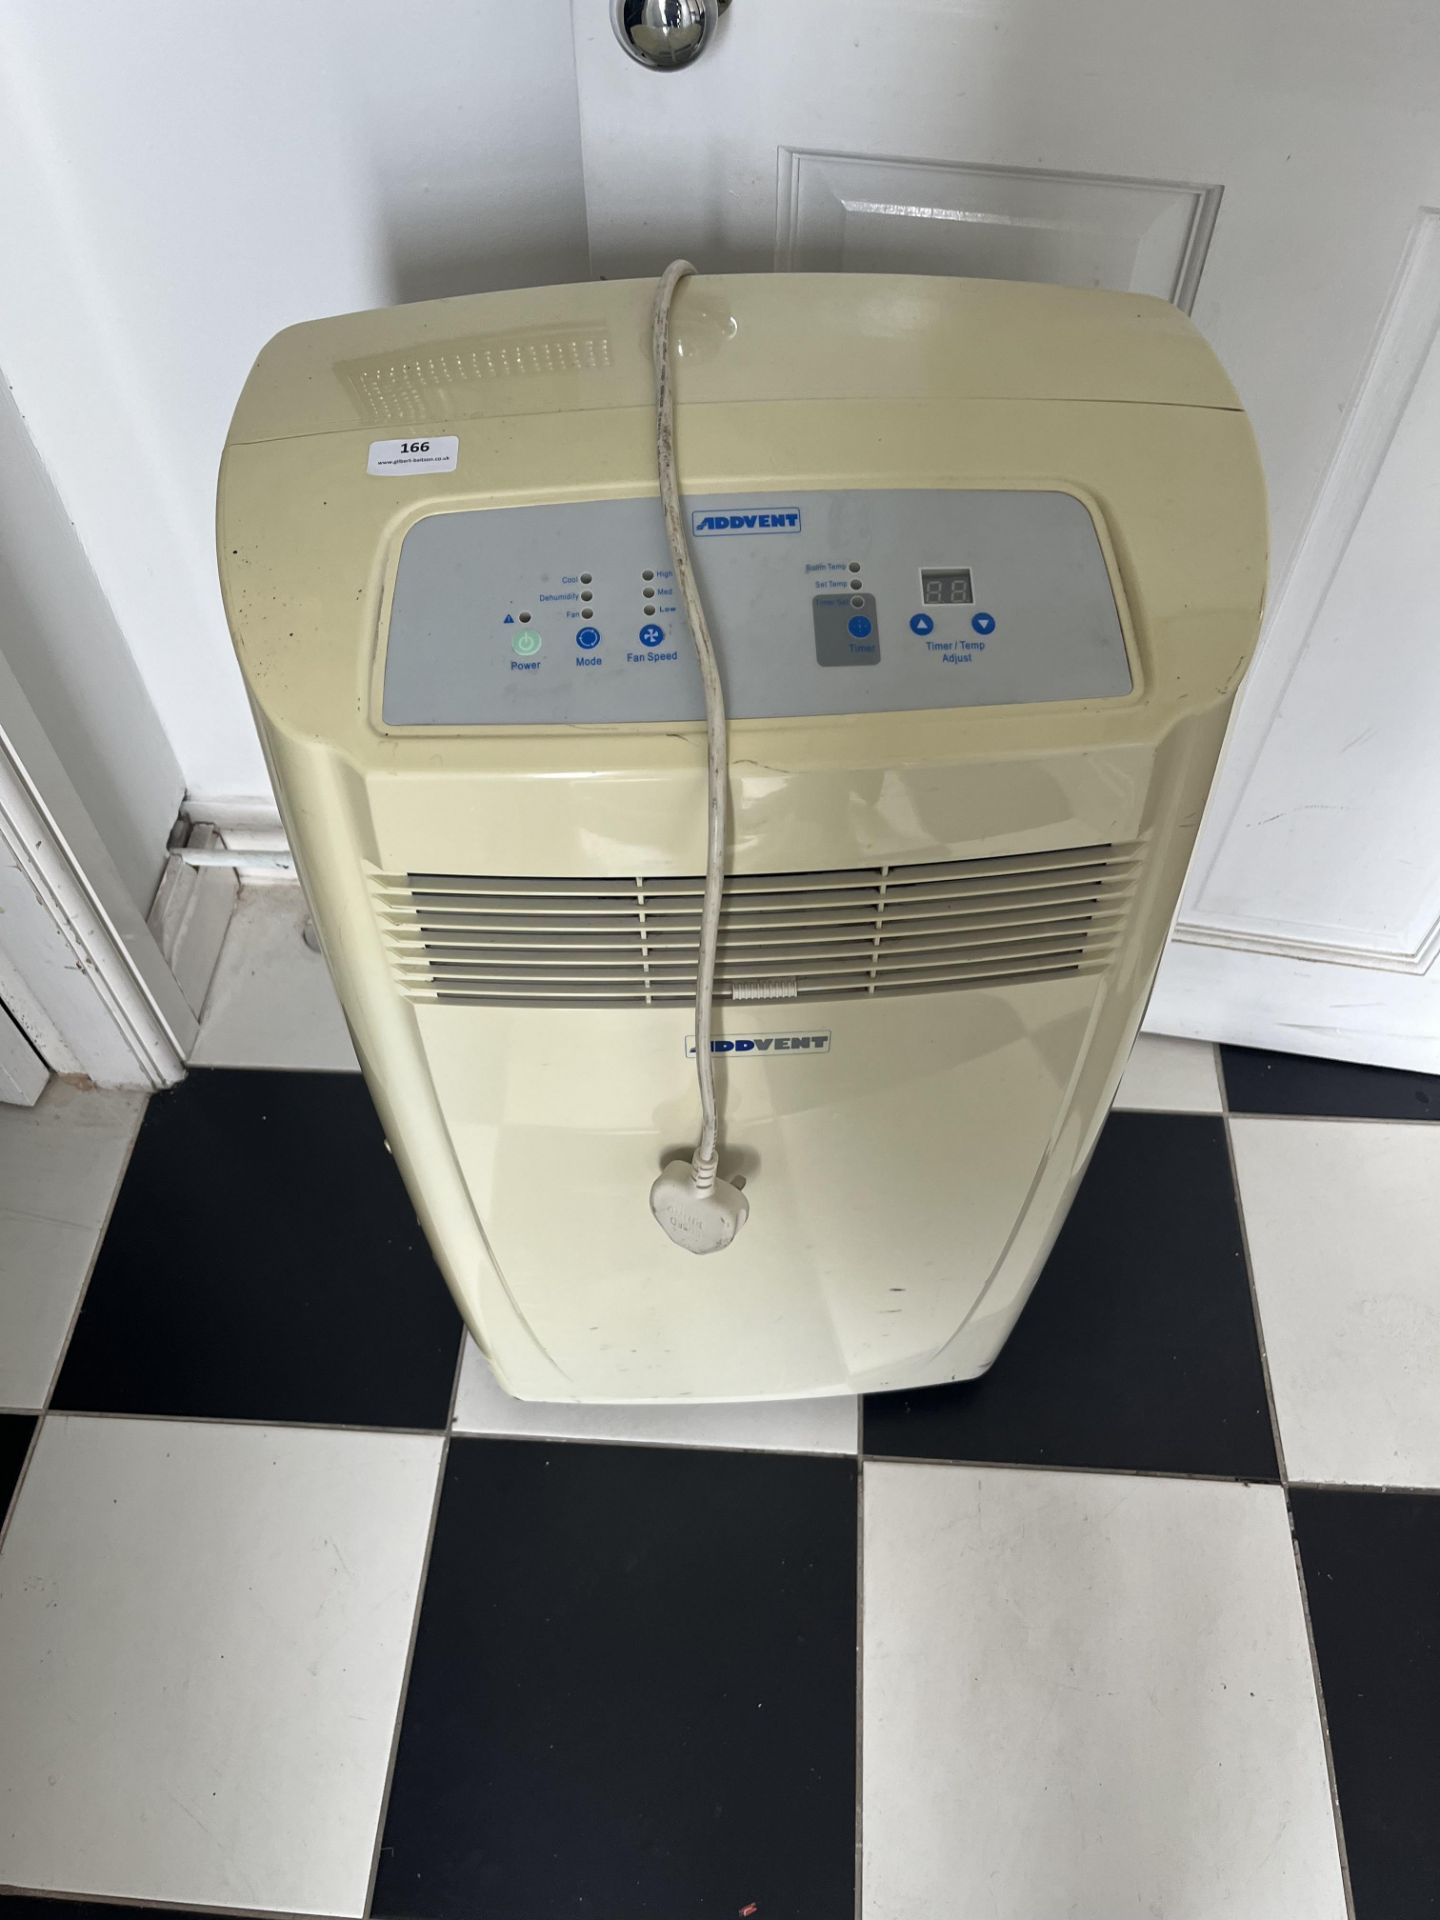 *Addvent Portable Air Conditioning Unit